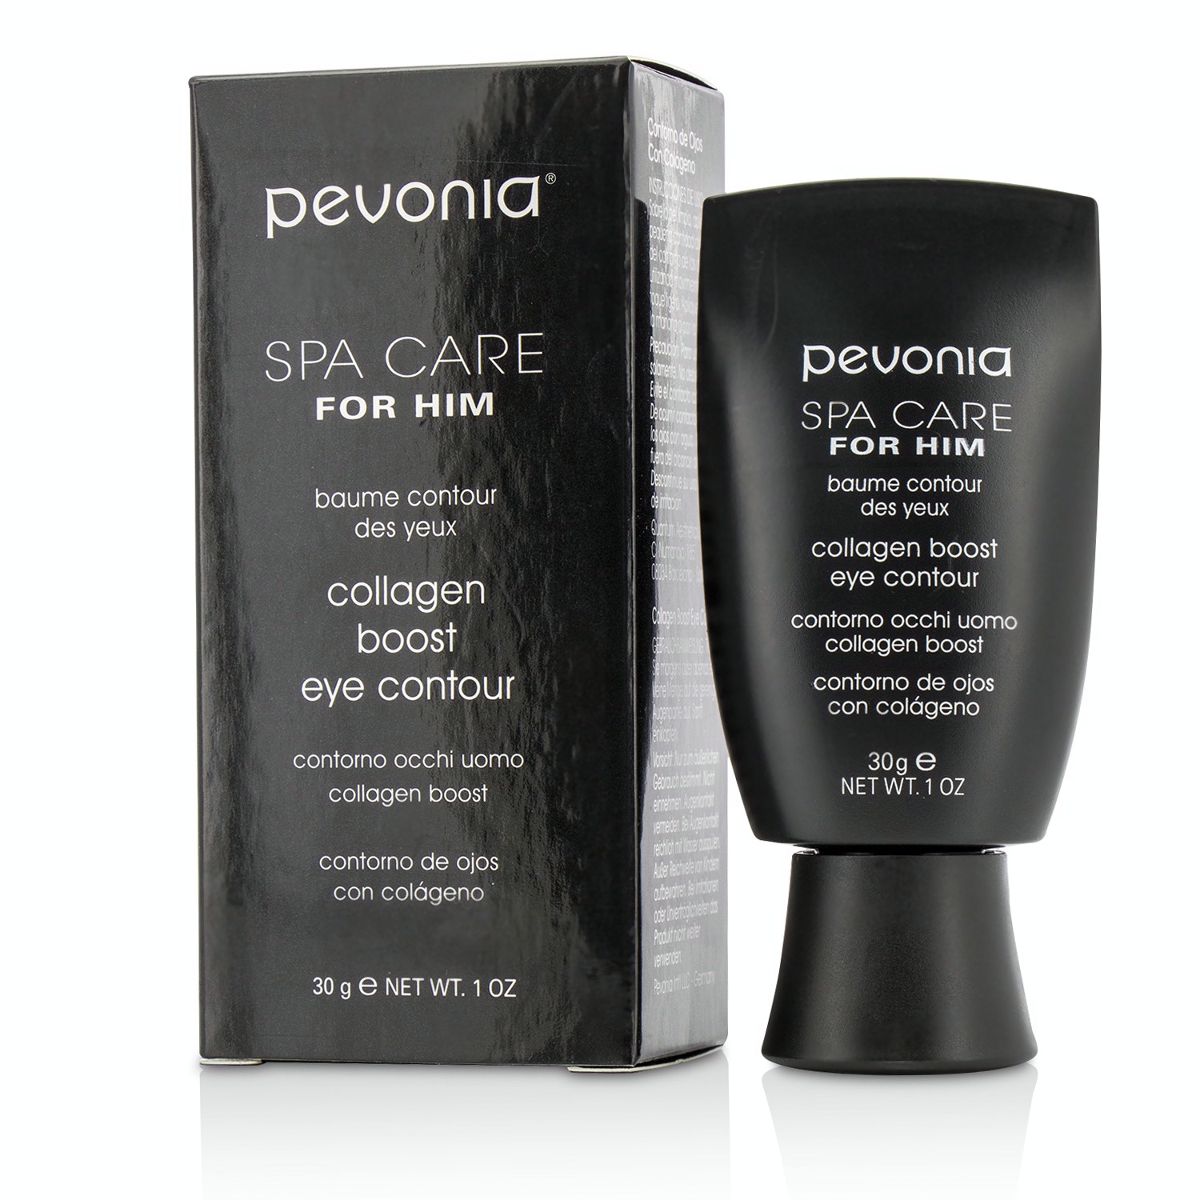 Spa Care For Him Collagen Boost Eye Contour Pevonia Botanica Image